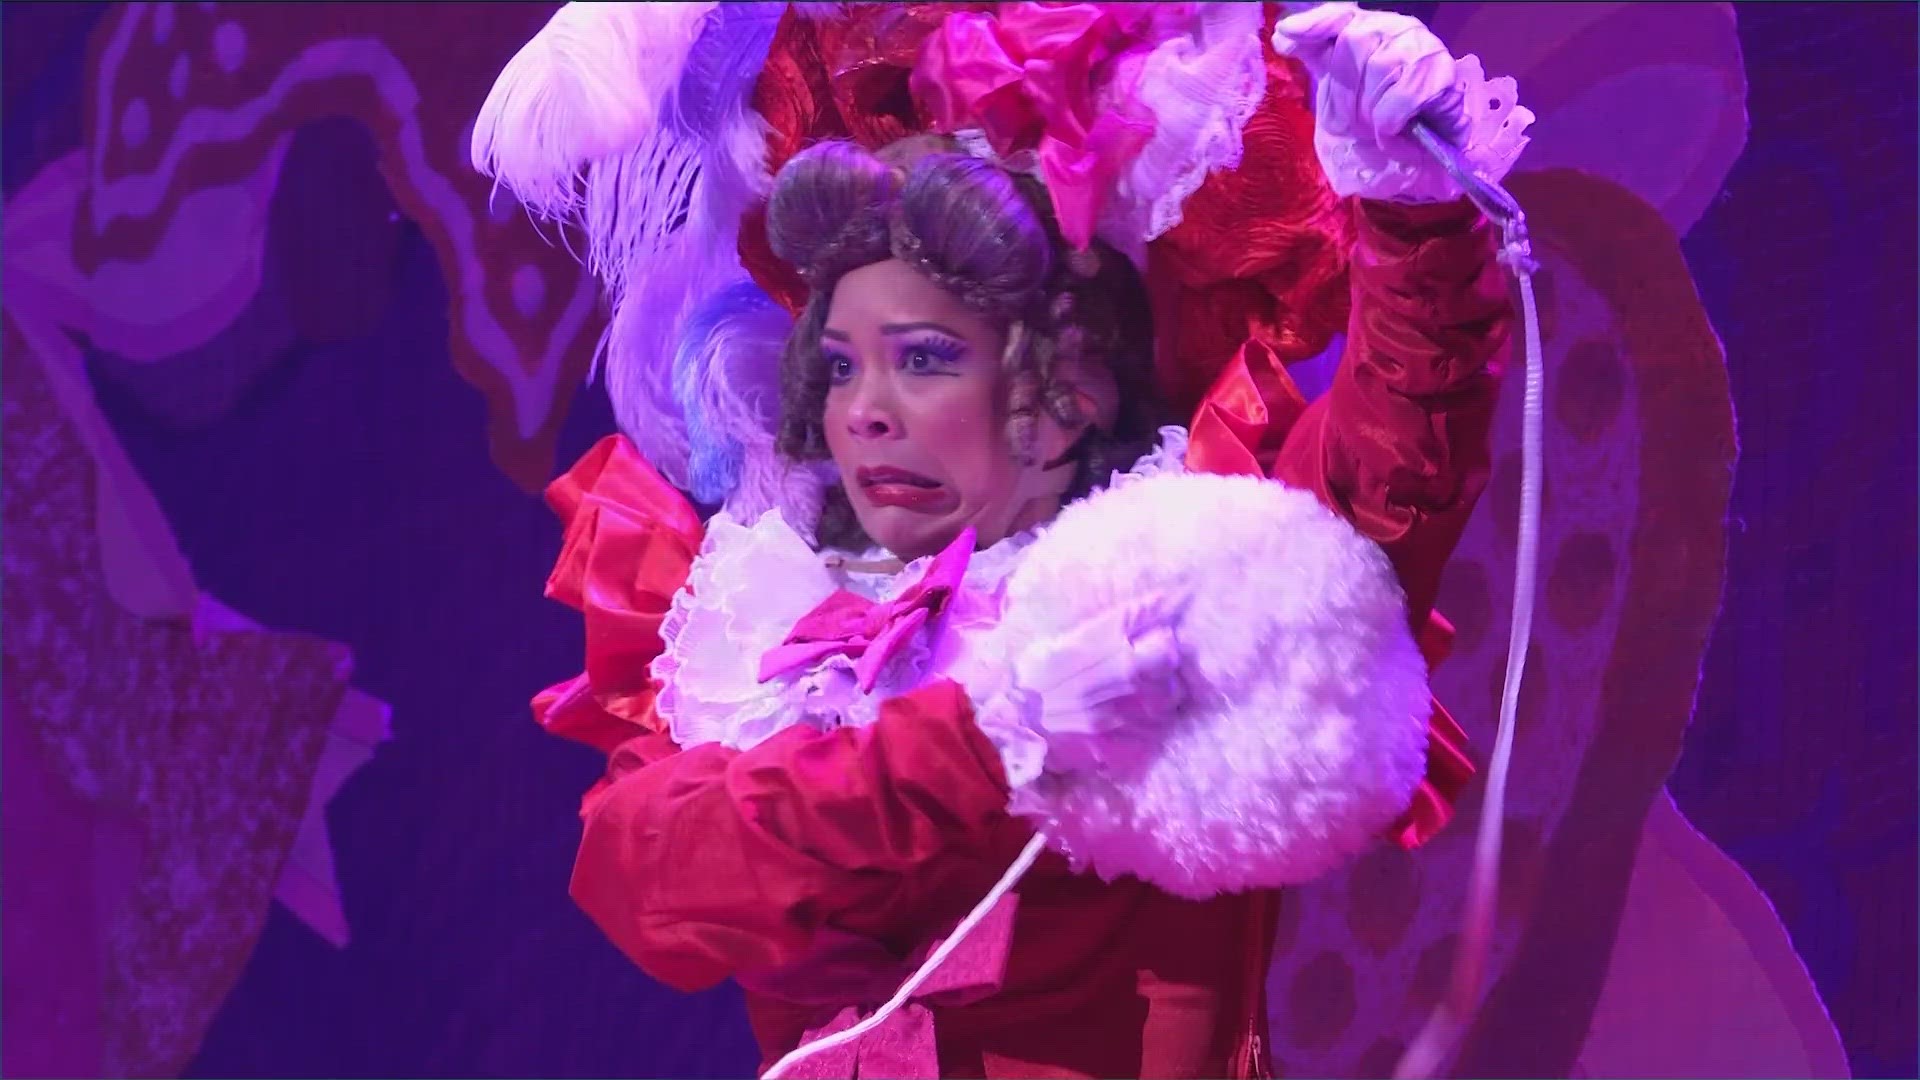 KVUE was represented in Ballet Austin's performance of "The Nutcracker." Political Director and anchor Ashley Goudeau performed as Mother Ginger!